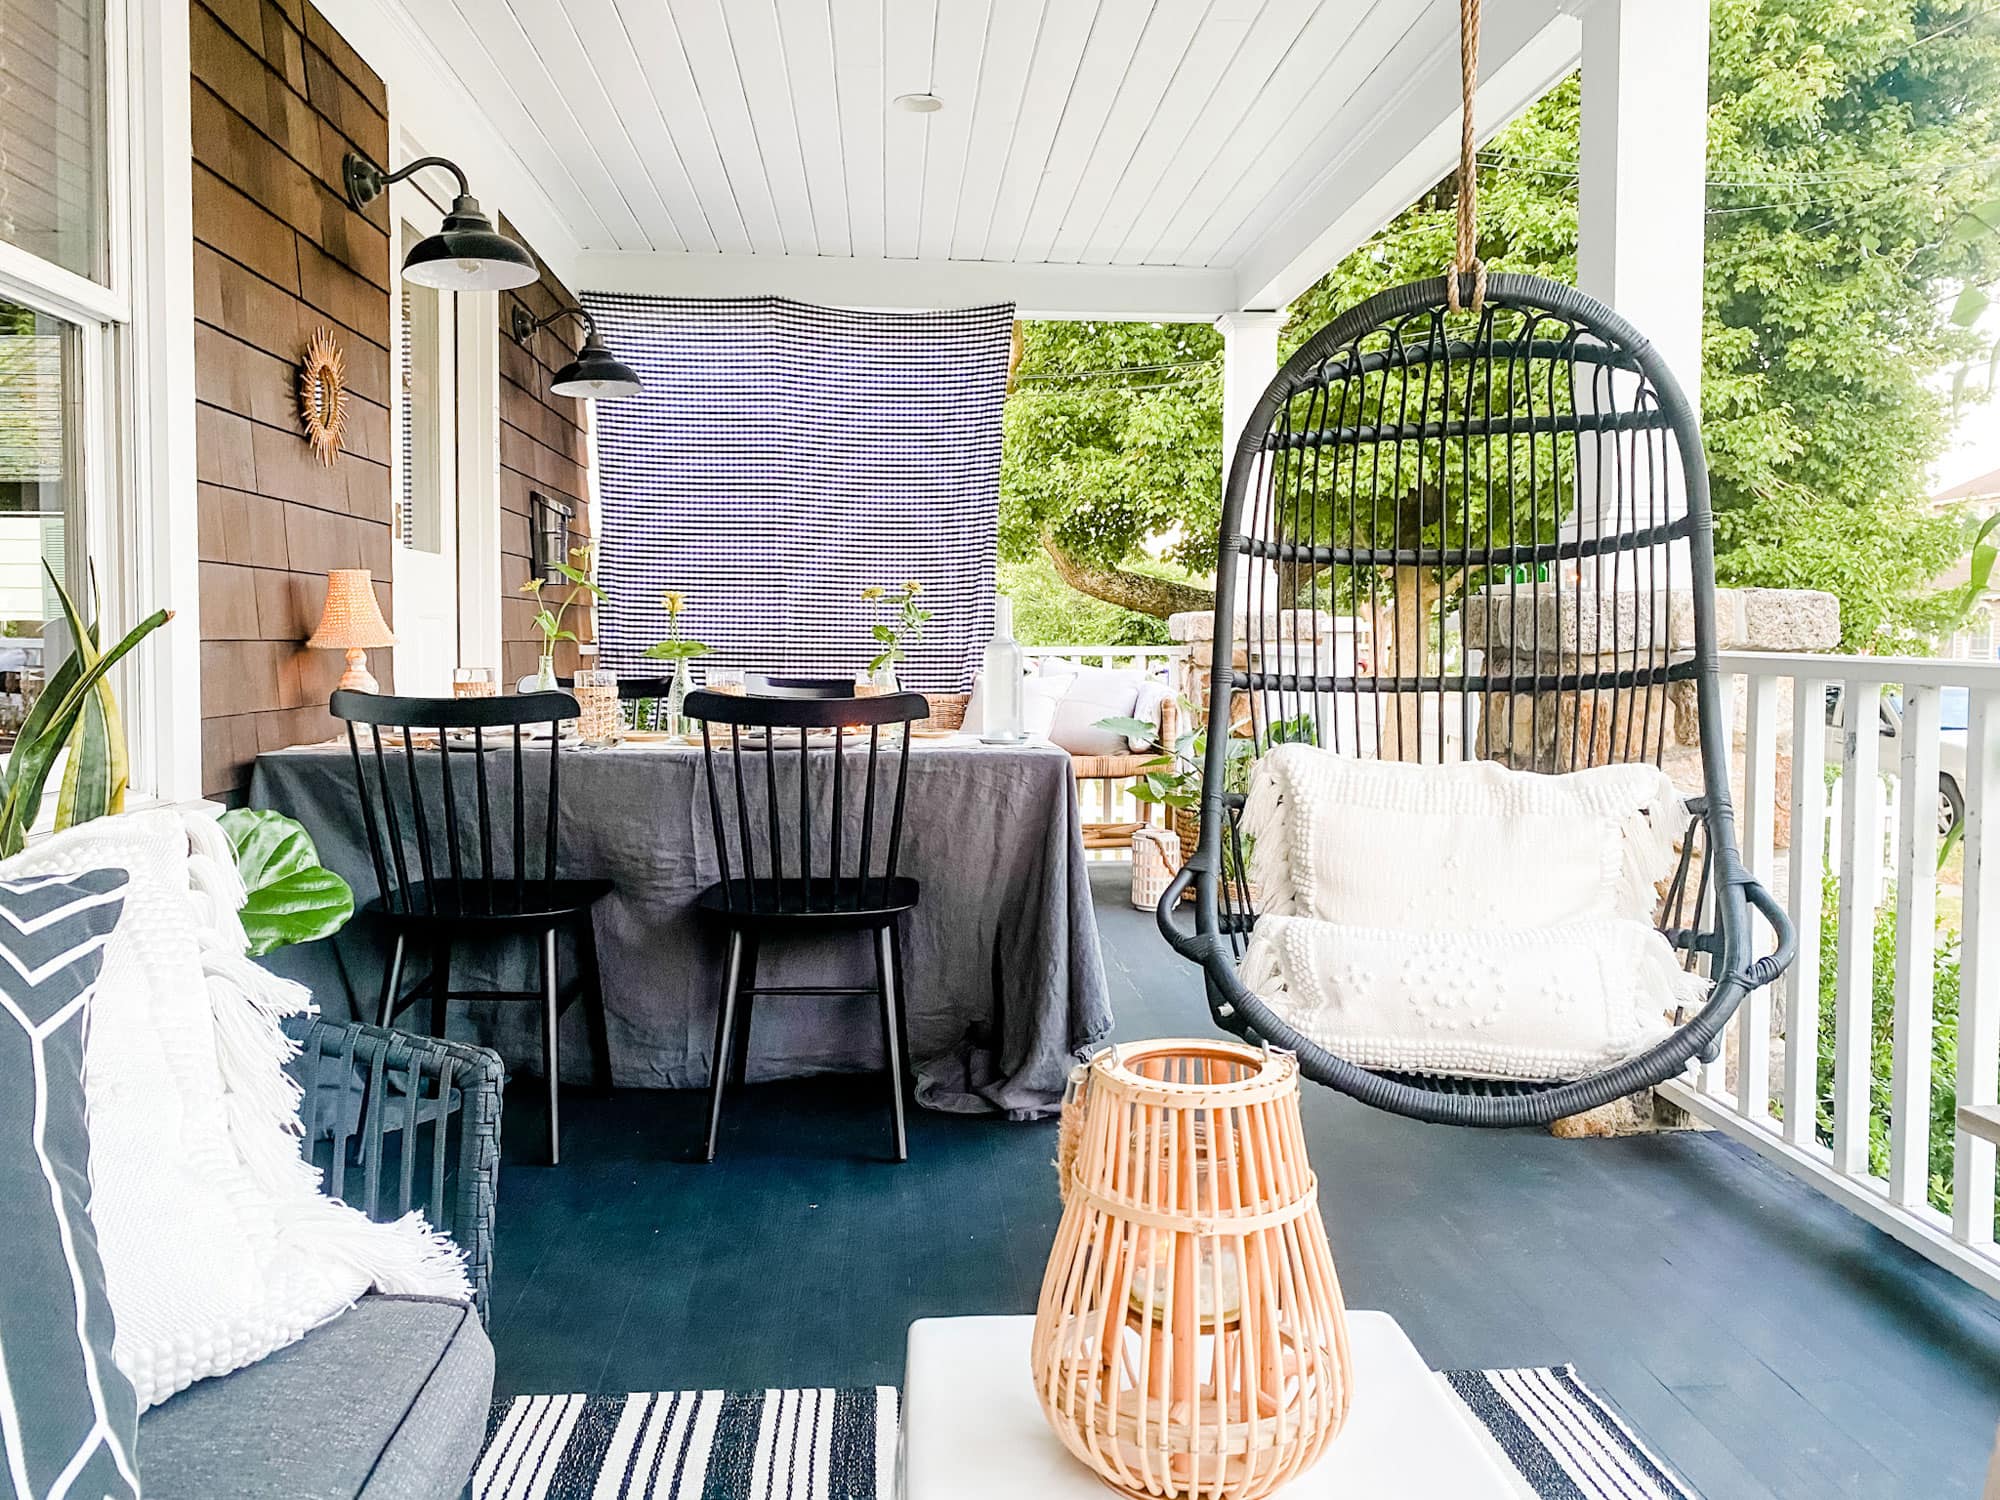 Outdoor Living Spaces: Ideas for Outdoor Rooms